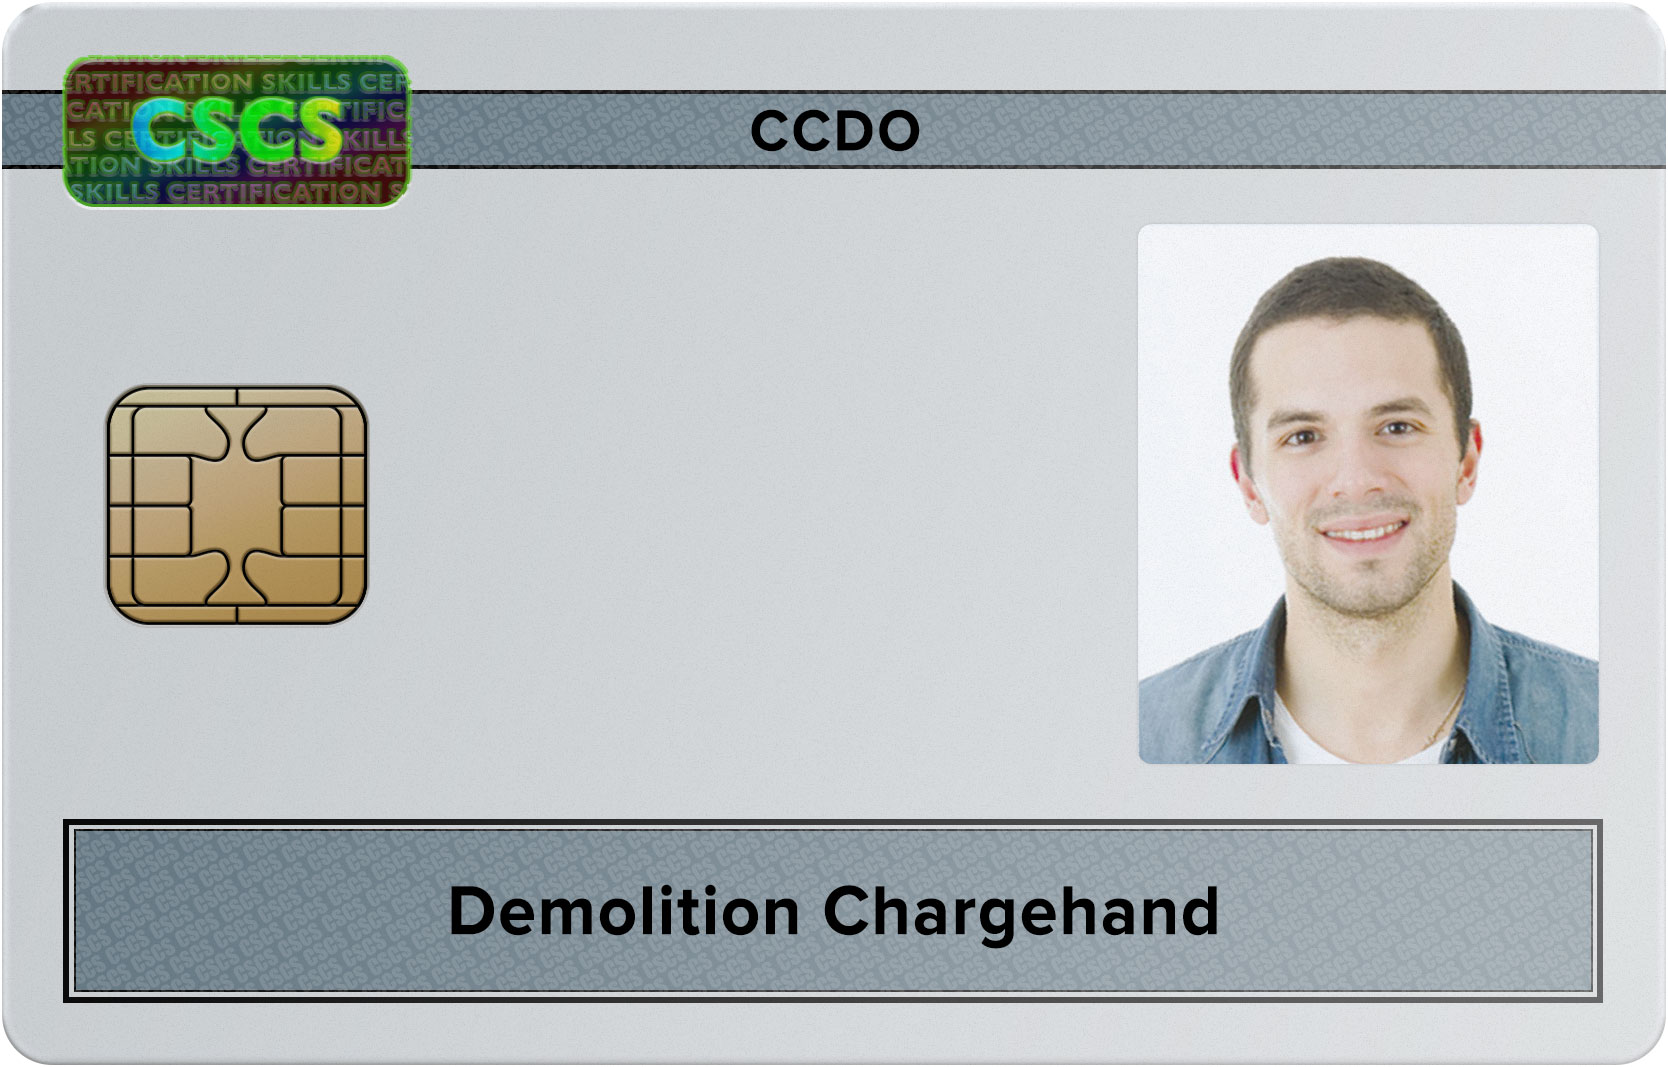 CCDO Demolition Chargehand (5 Year Card)